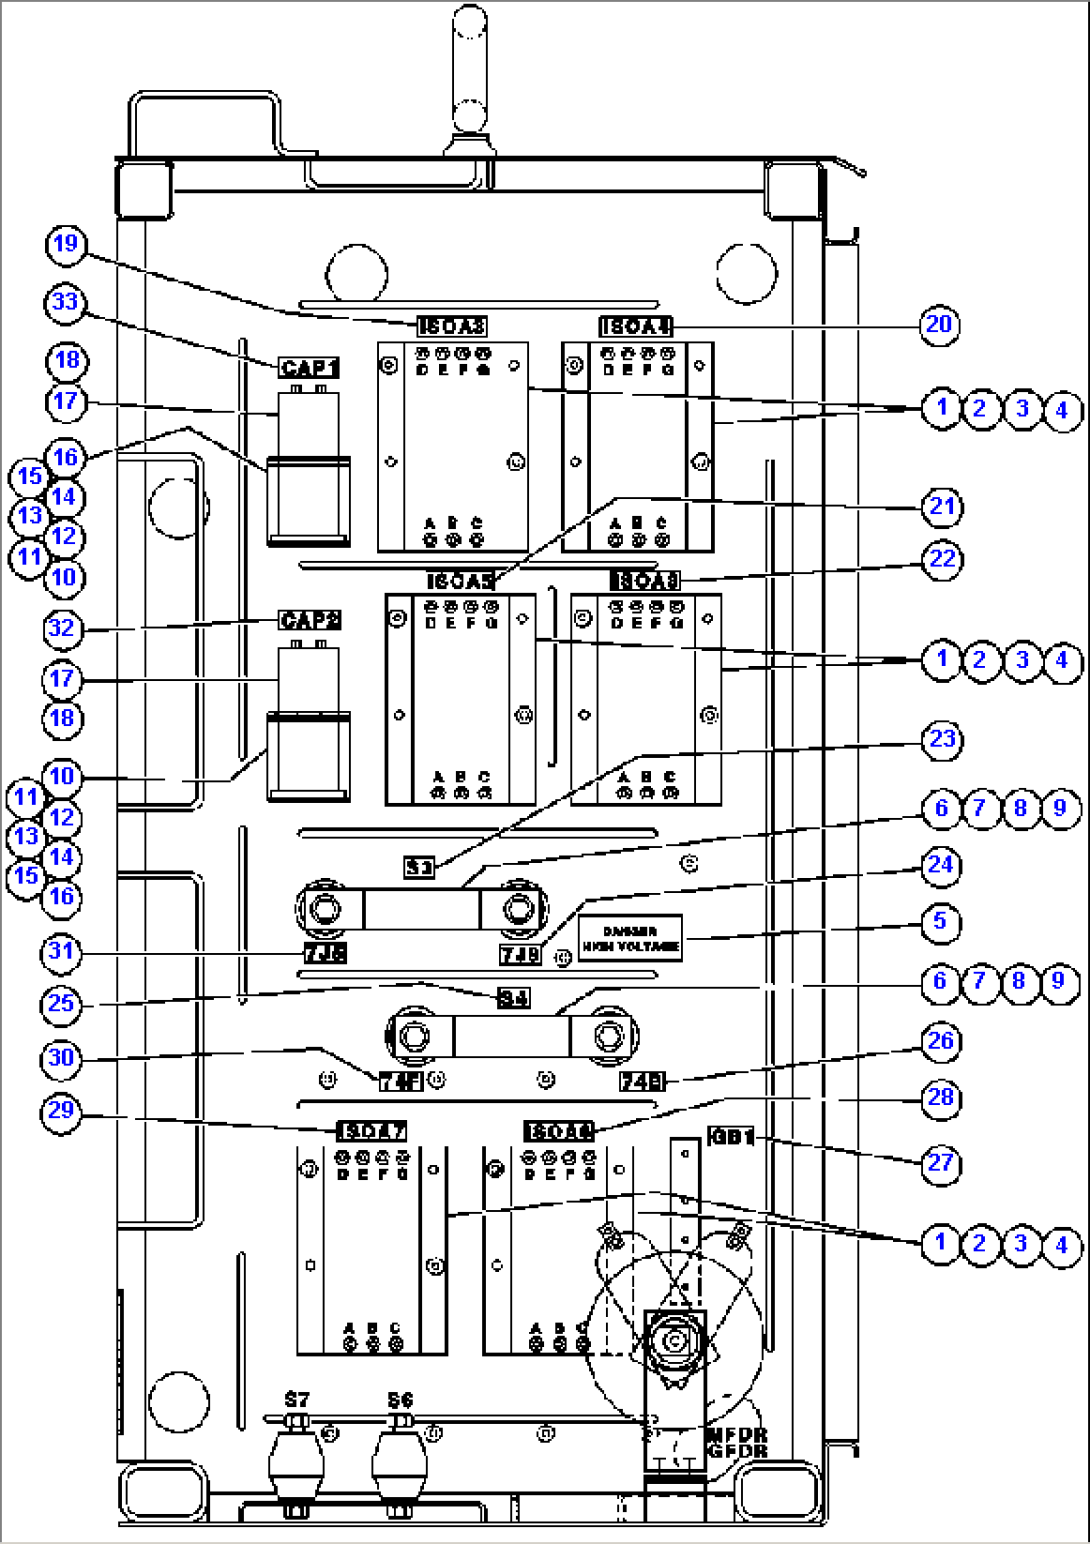 CONTROL CABINET ASSEMBLY - 9